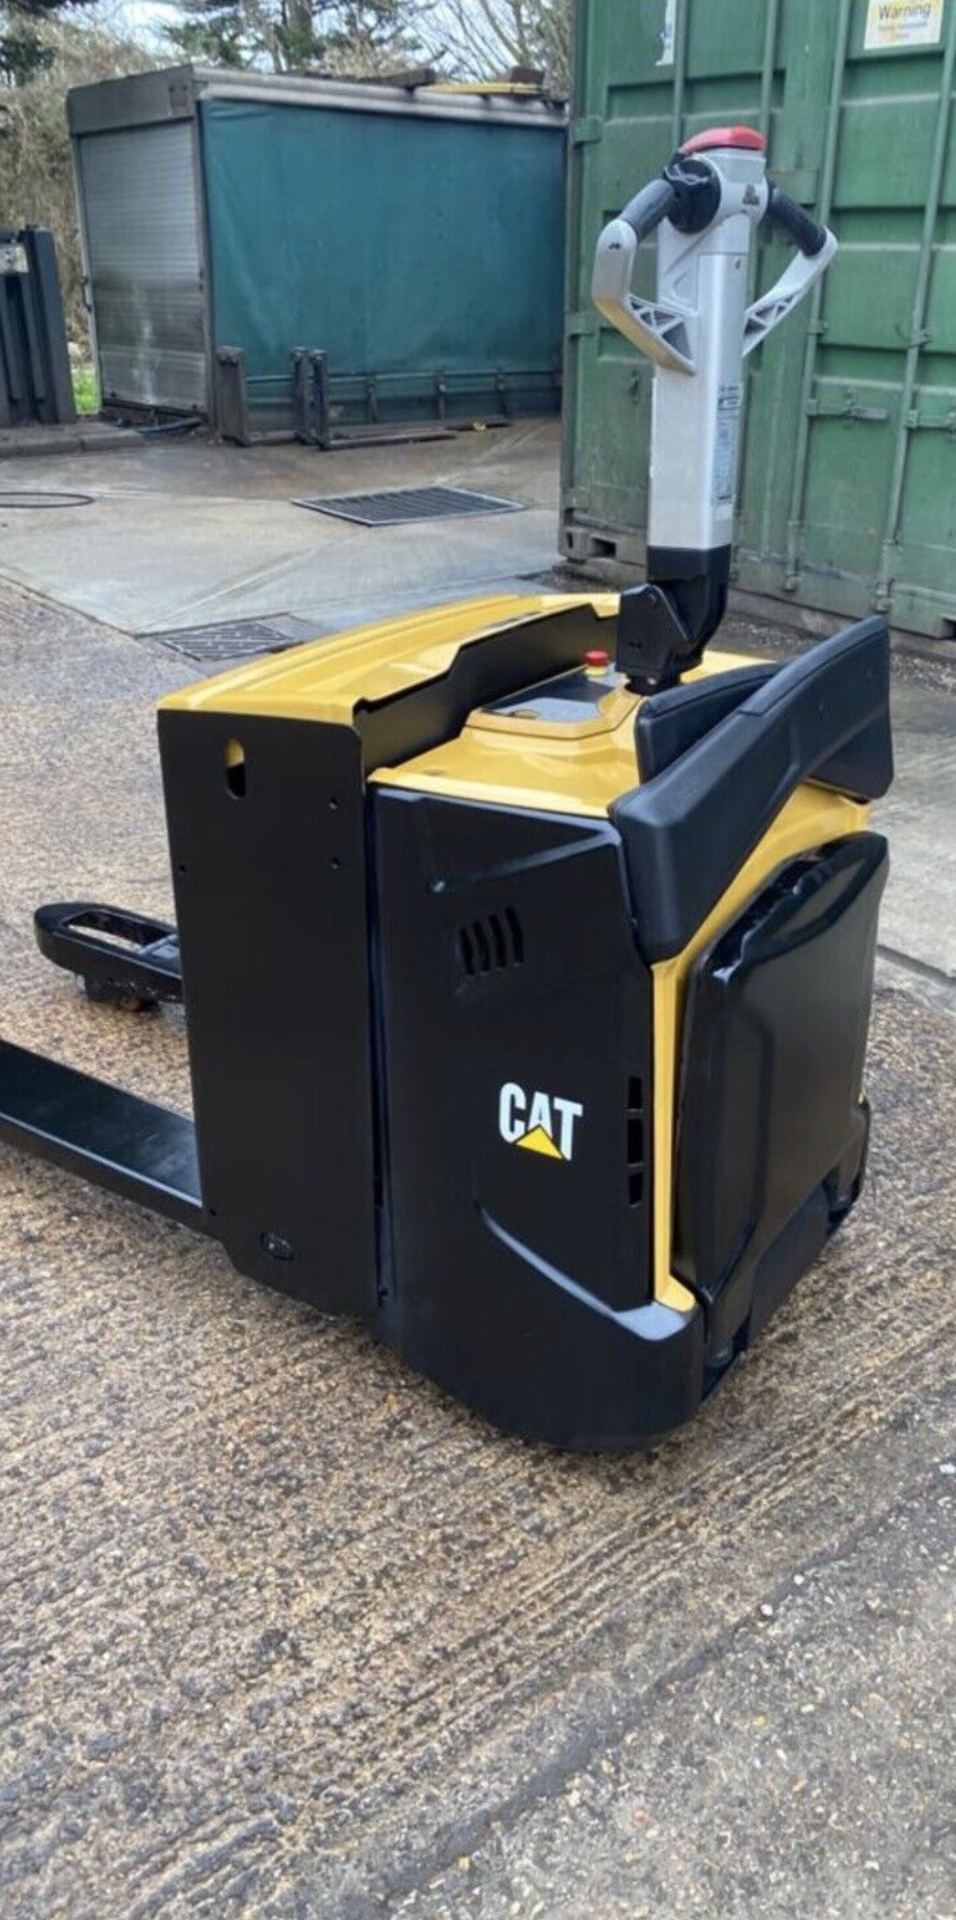 CATERPILLAR 2 Electric Pallet Truck - Image 2 of 4